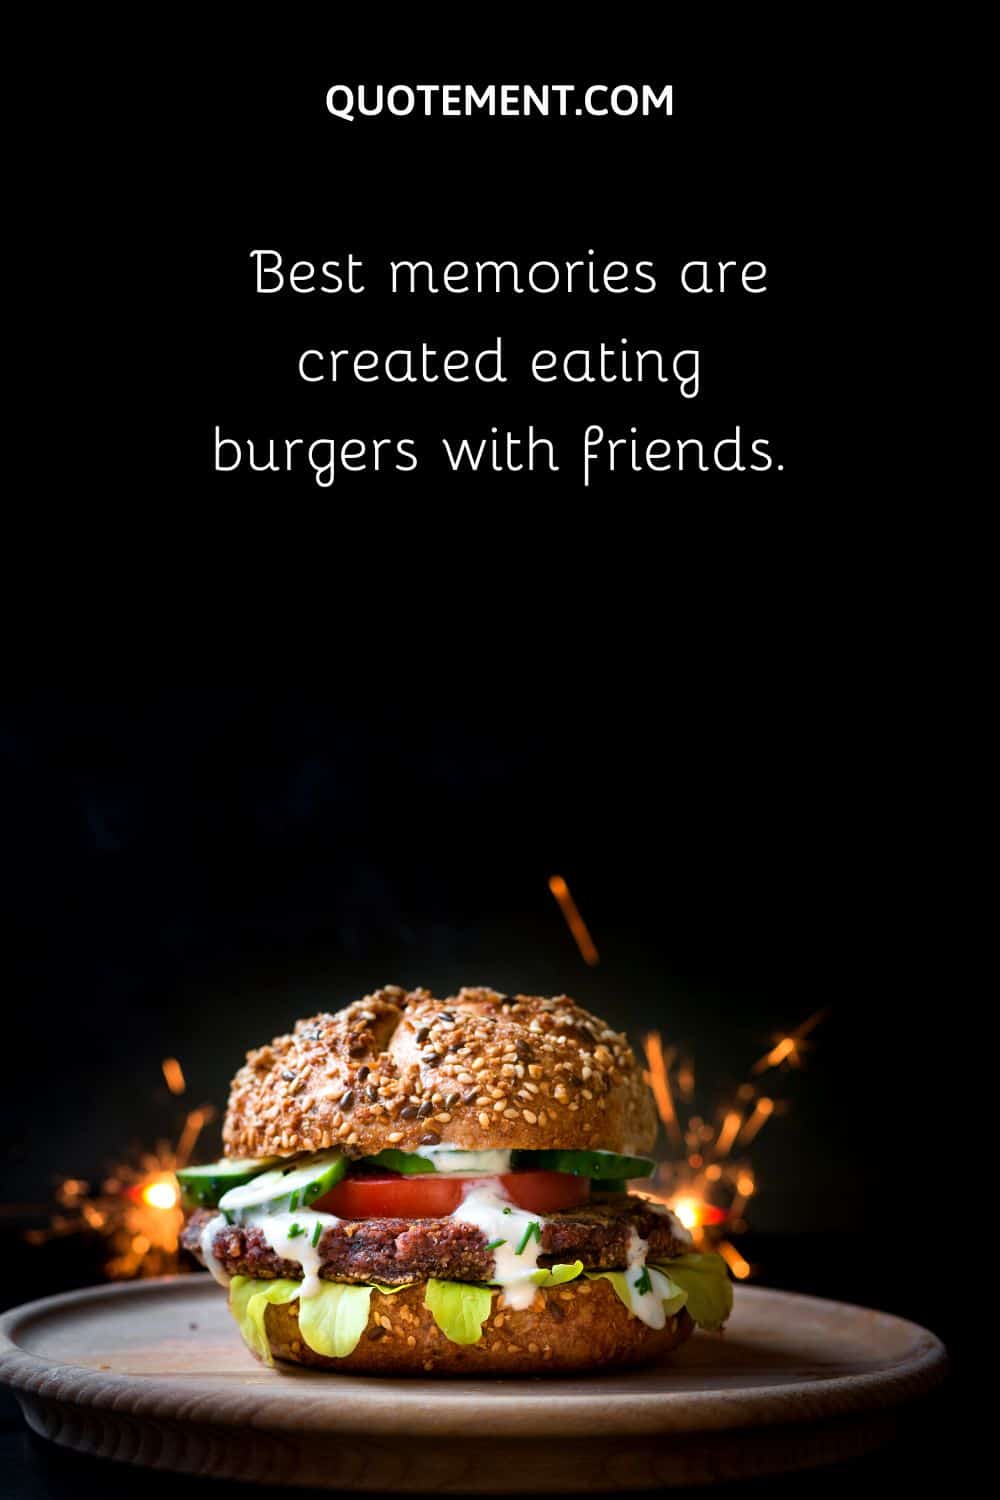 Best memories are created eating burgers with friends.